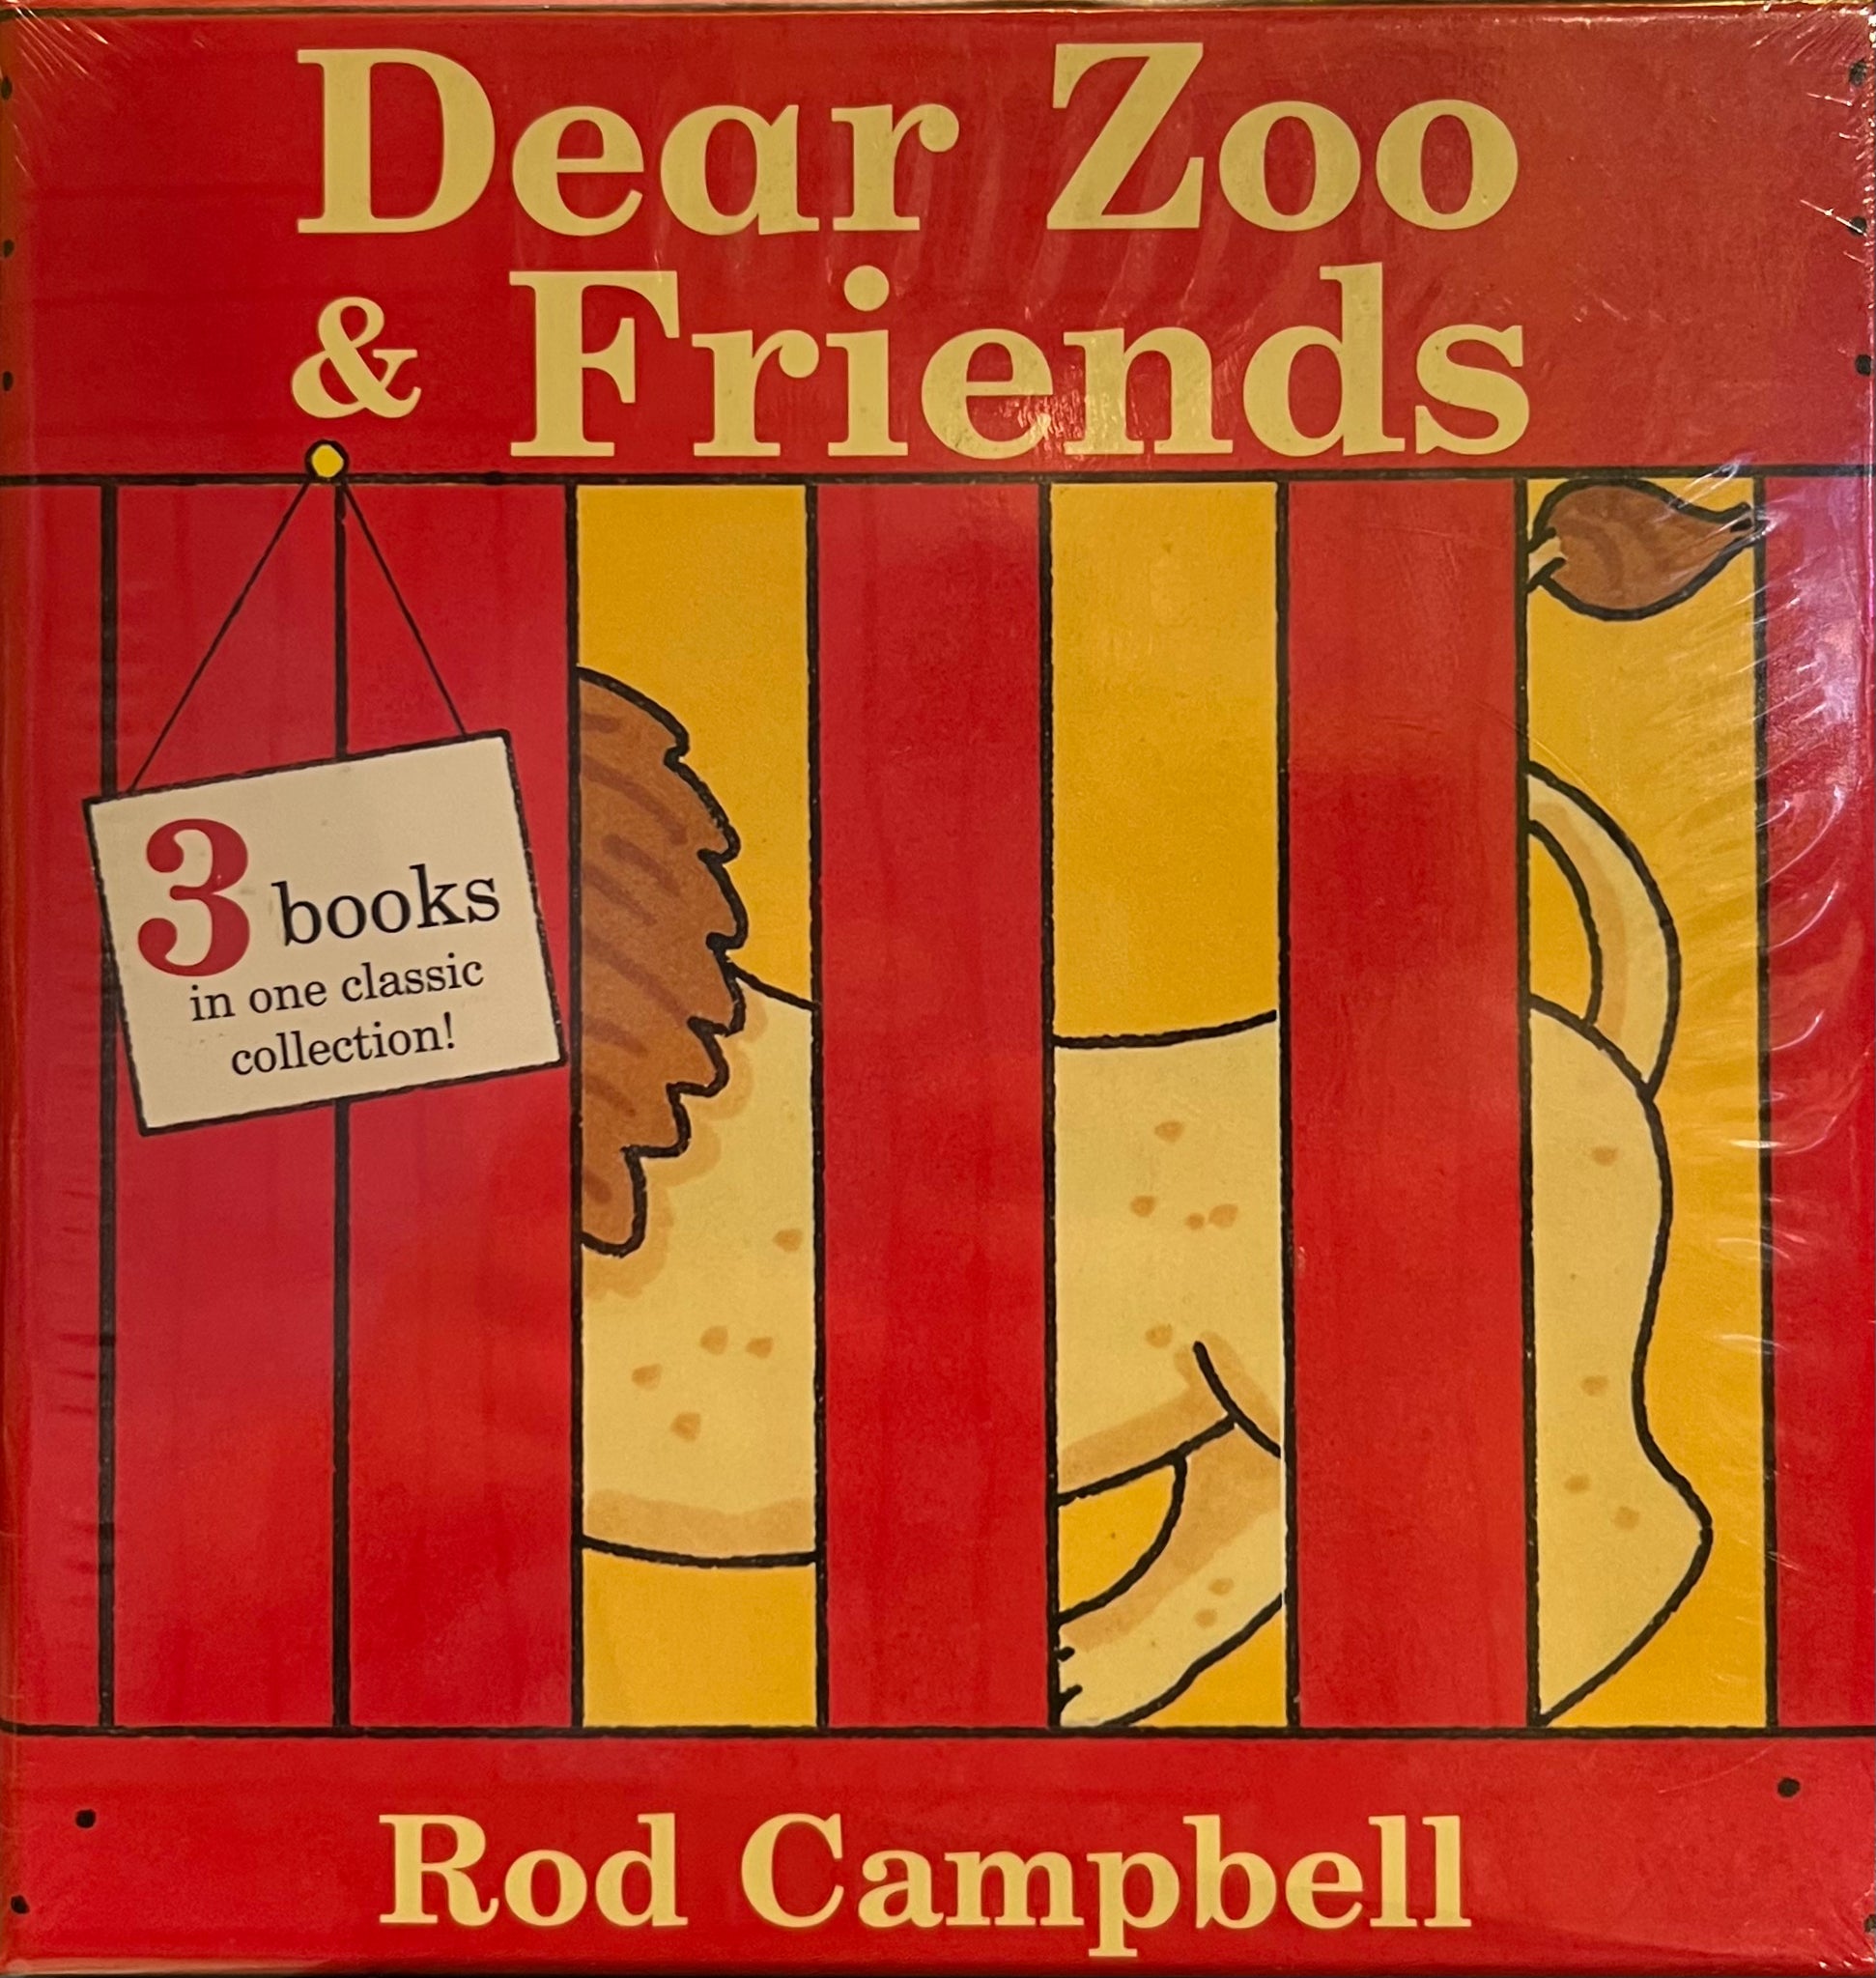 Dear Zoo and Friends, Rod Campbell